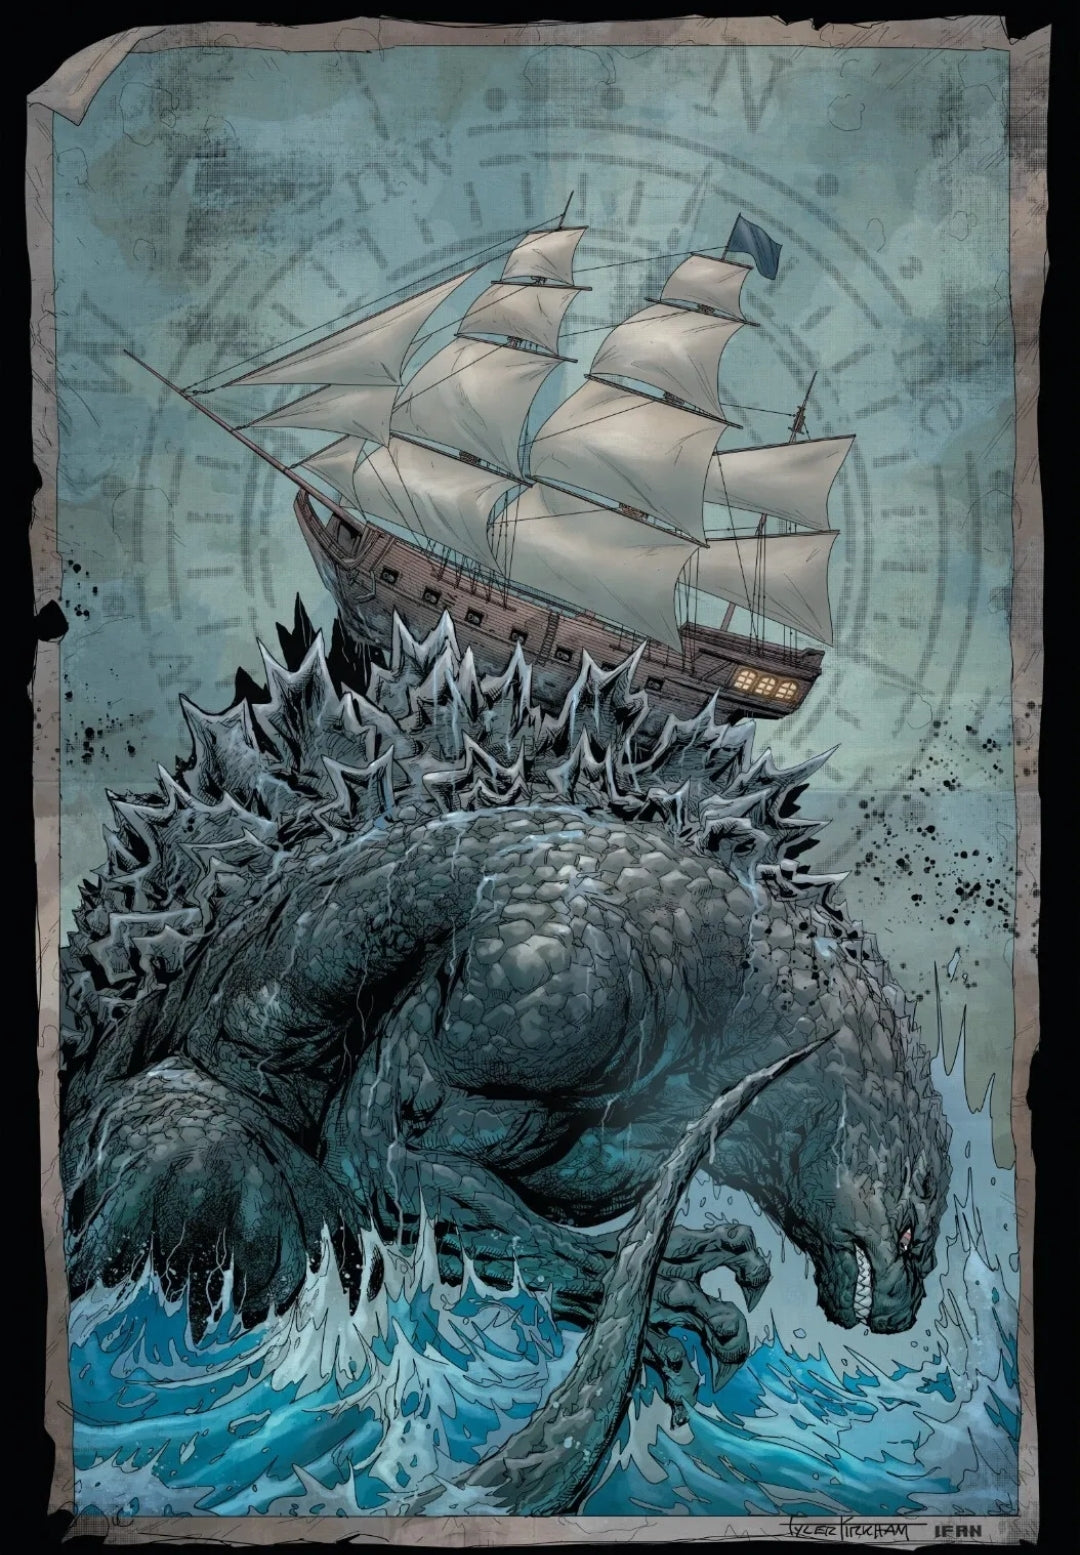 GODZILLA: HERE THERE BE DRAGONS #1 1:10 BY TYLER KIRKHAM